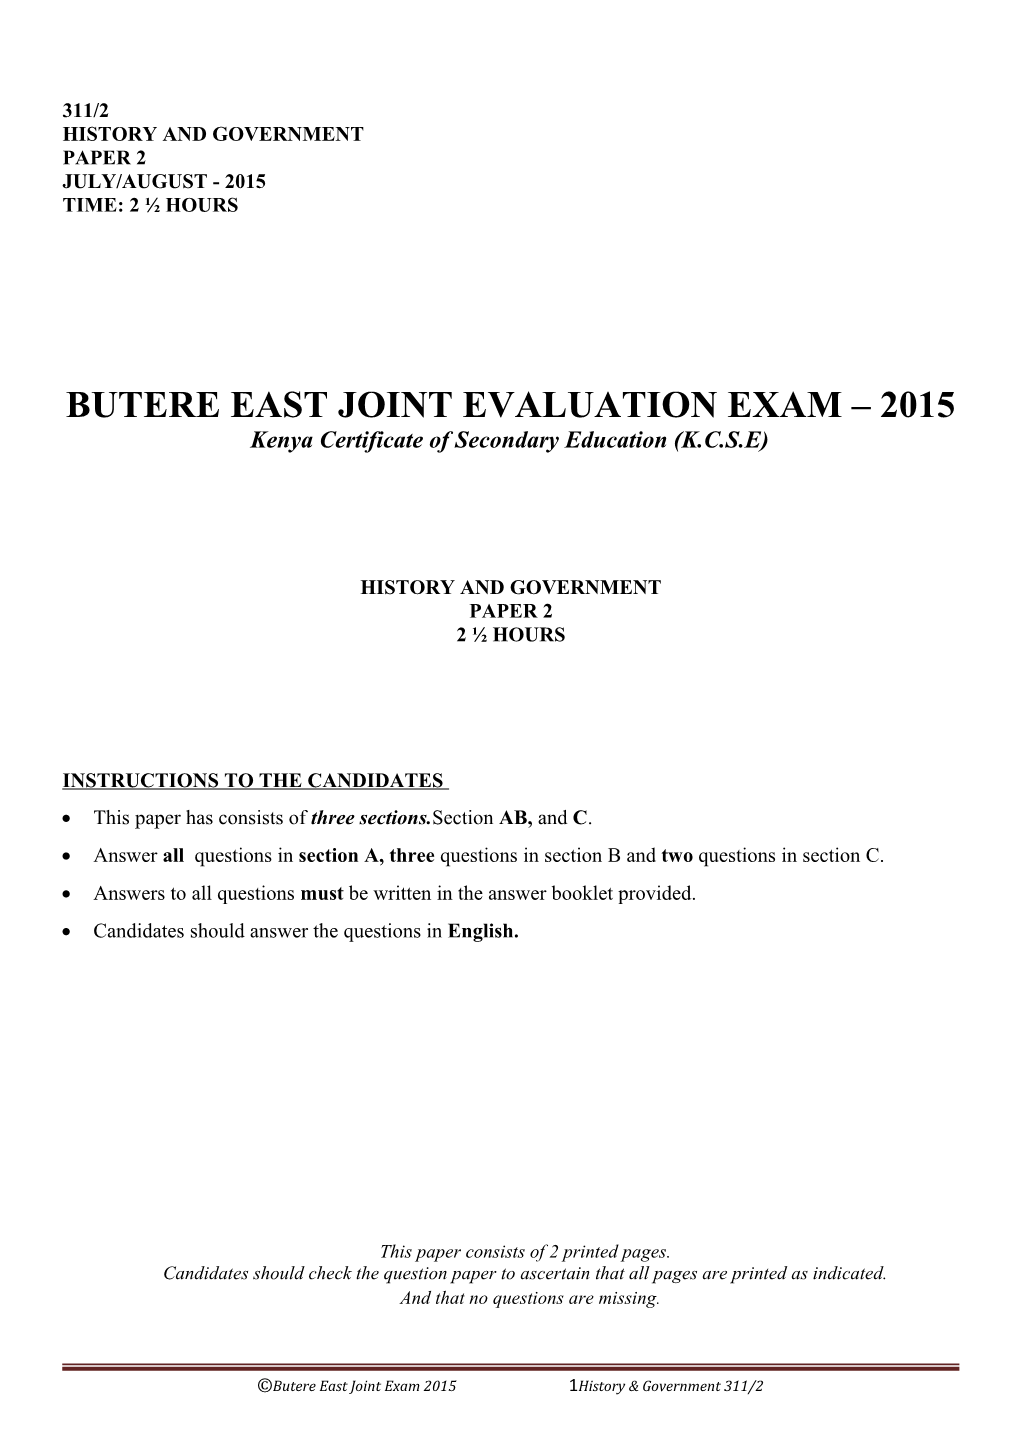 Butere East Joint Evaluation Exam 2015